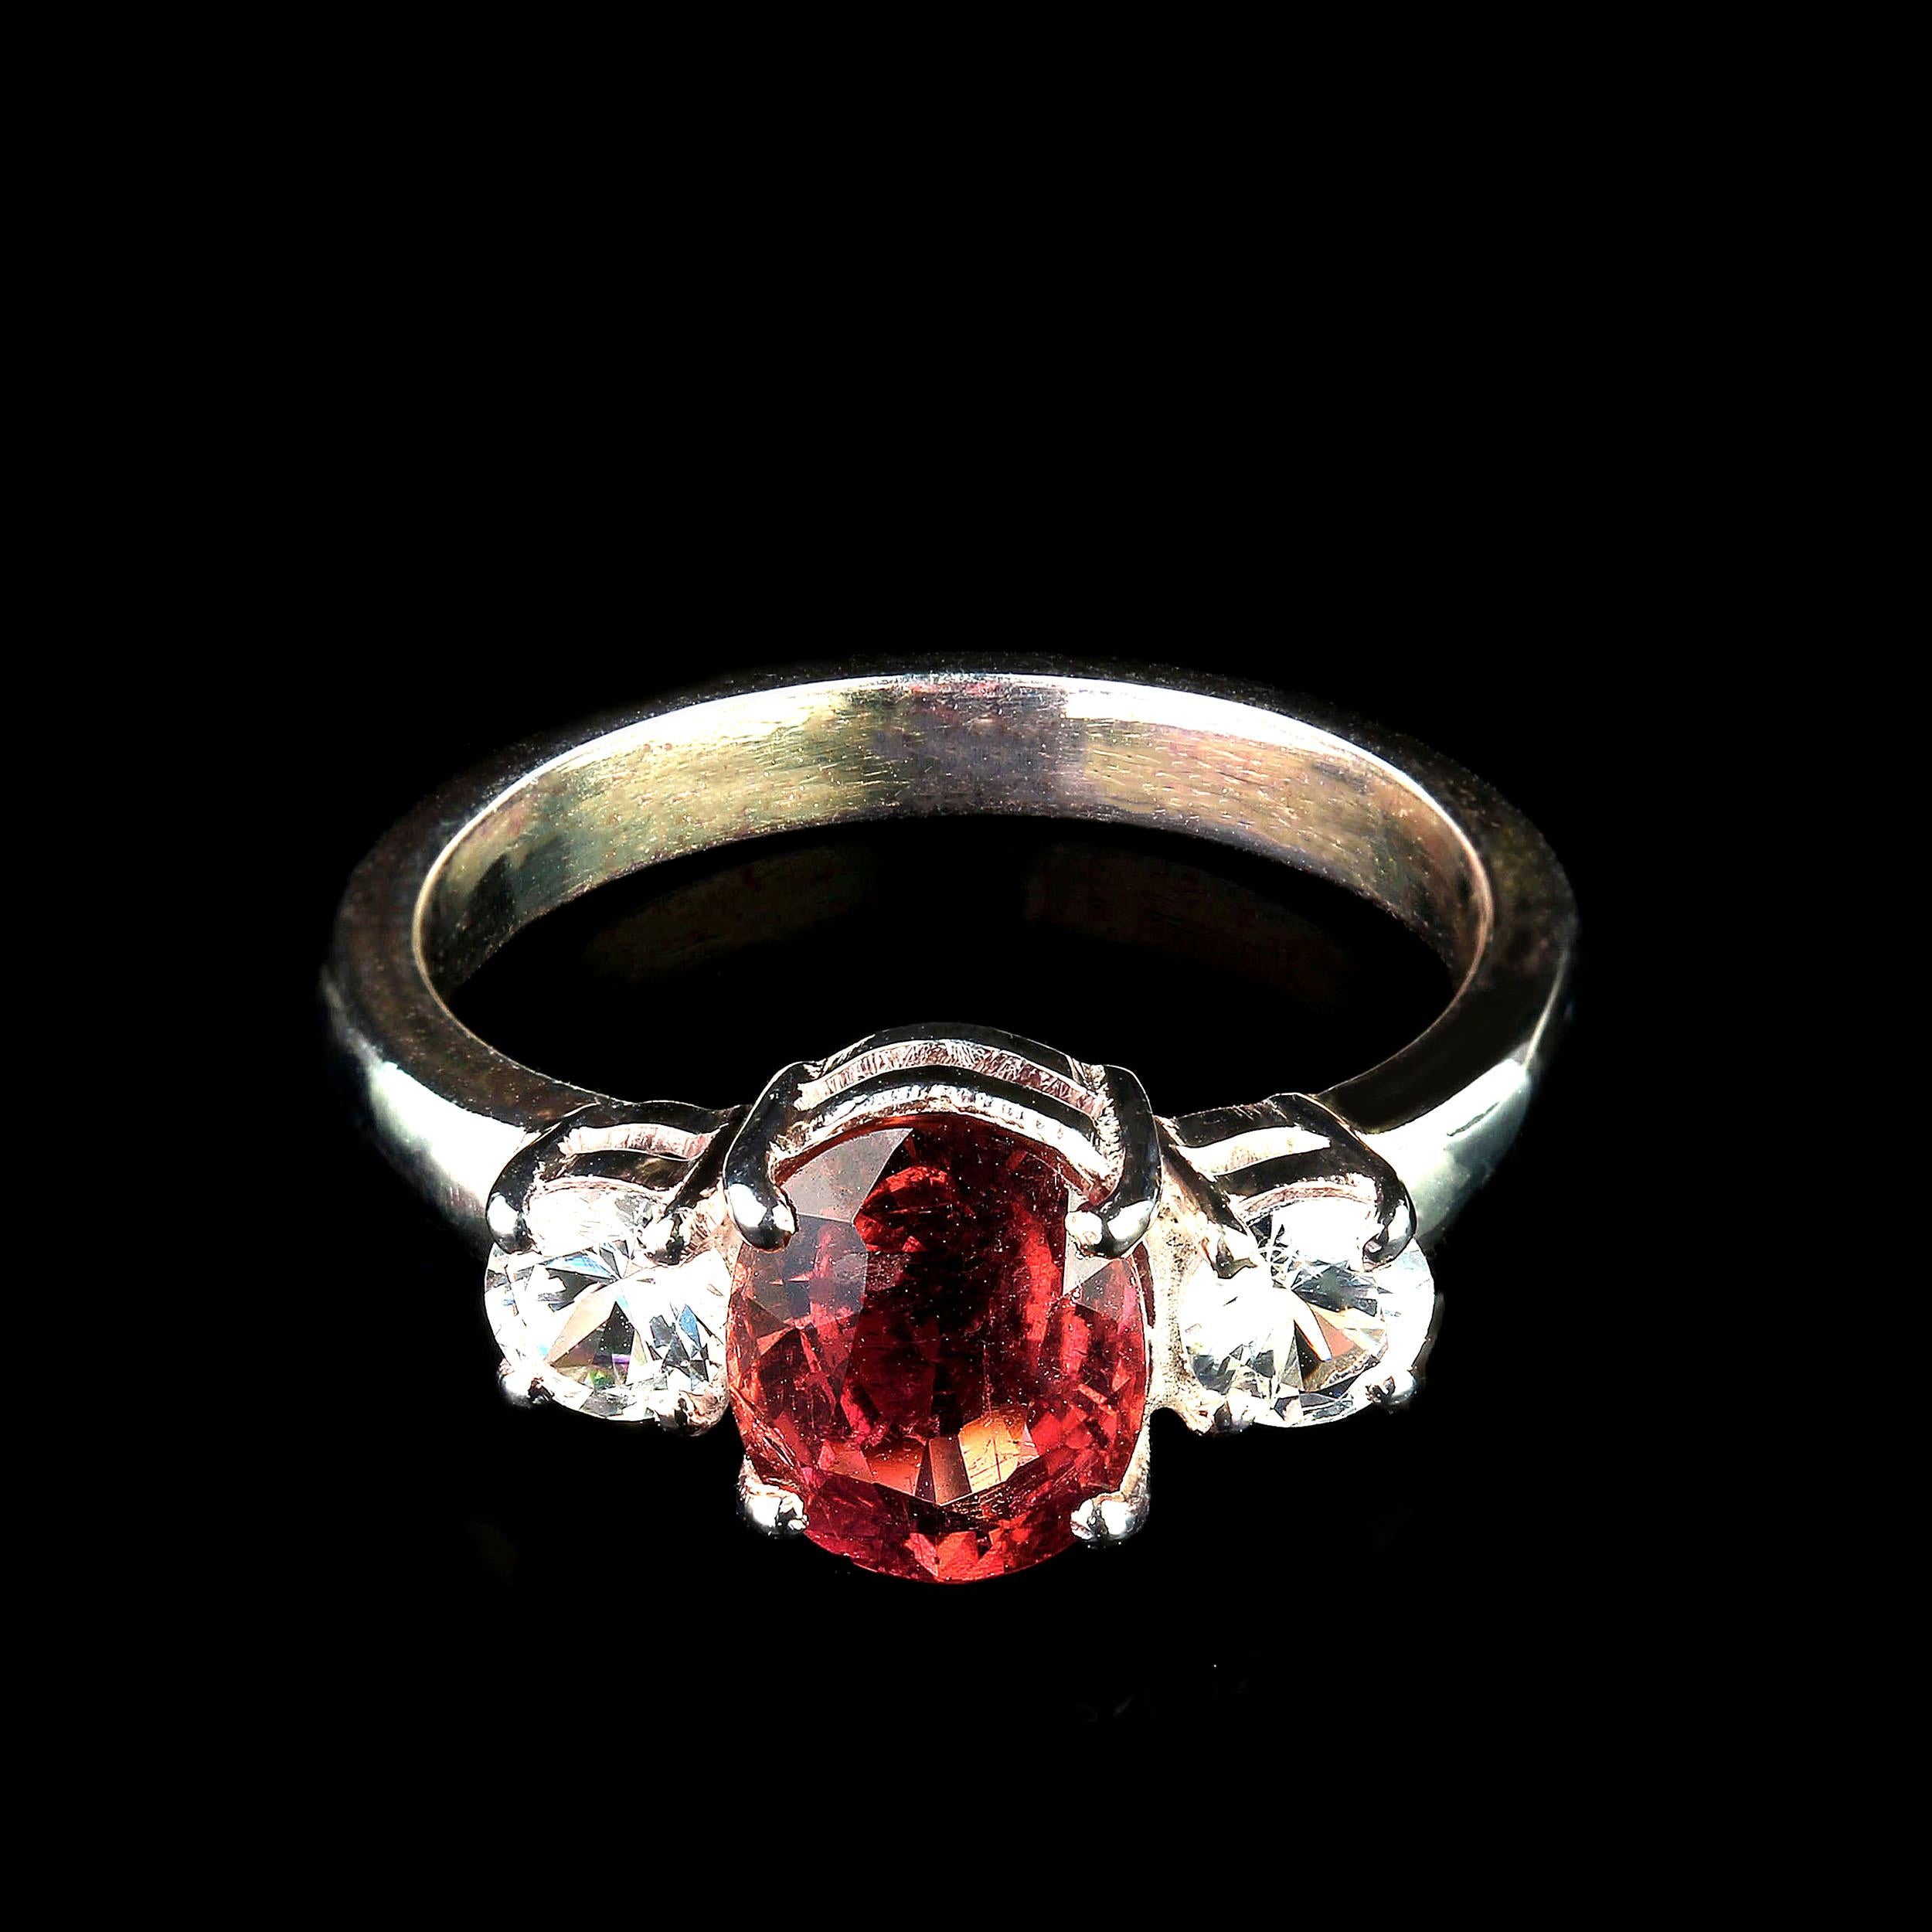 Artisan AJD Ring of Sparkling Red Tourmaline Accented with Genuine Zircons For Sale